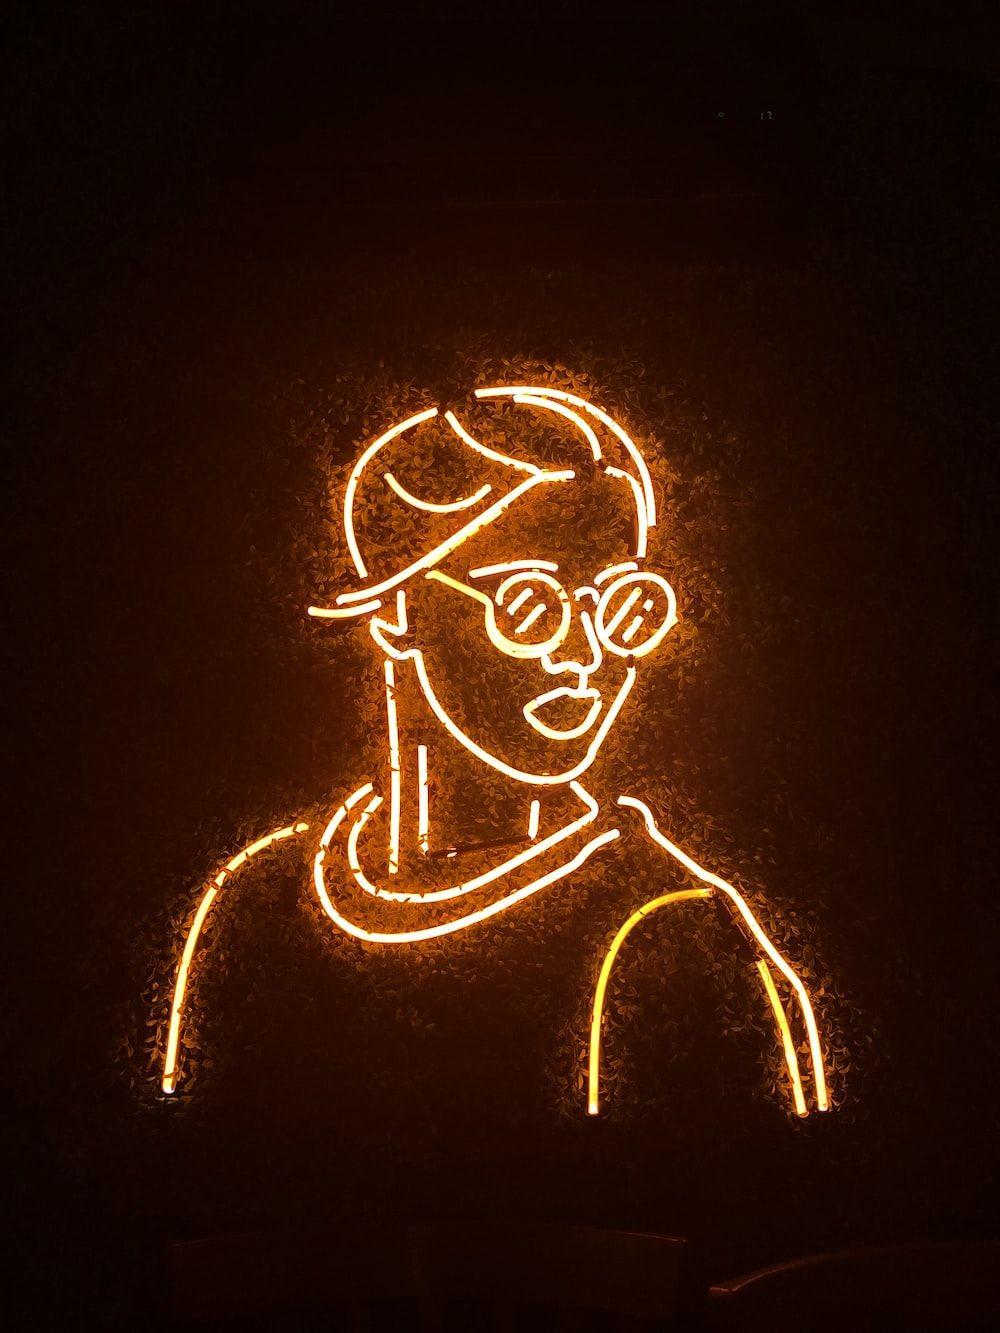 A neon sign of a man with glasses. - Neon orange